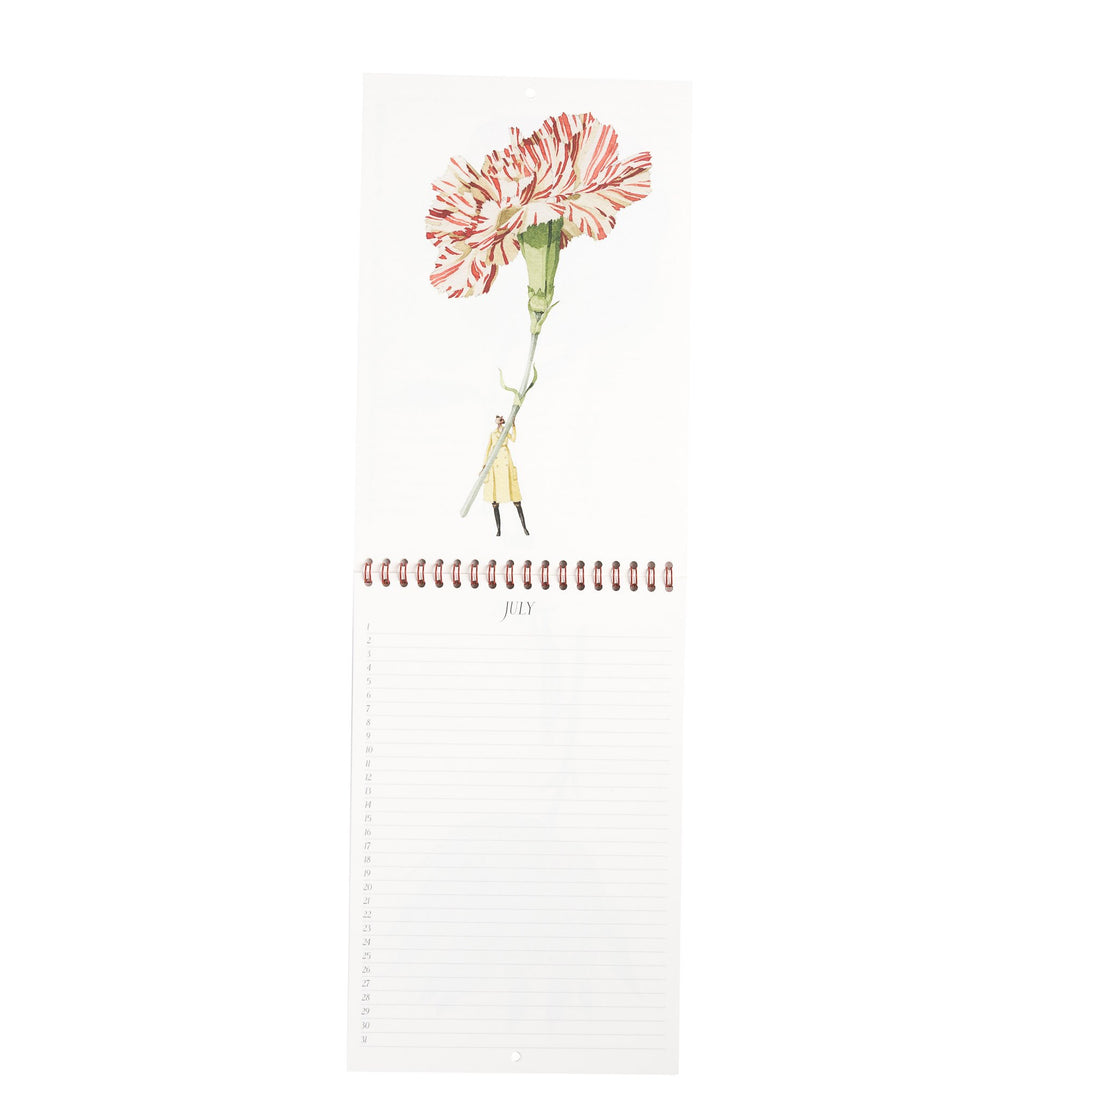 A perpetual In Bloom Birthday Calendar with an illustration of a flower from the In Bloom collection by Hester &amp; Cook.